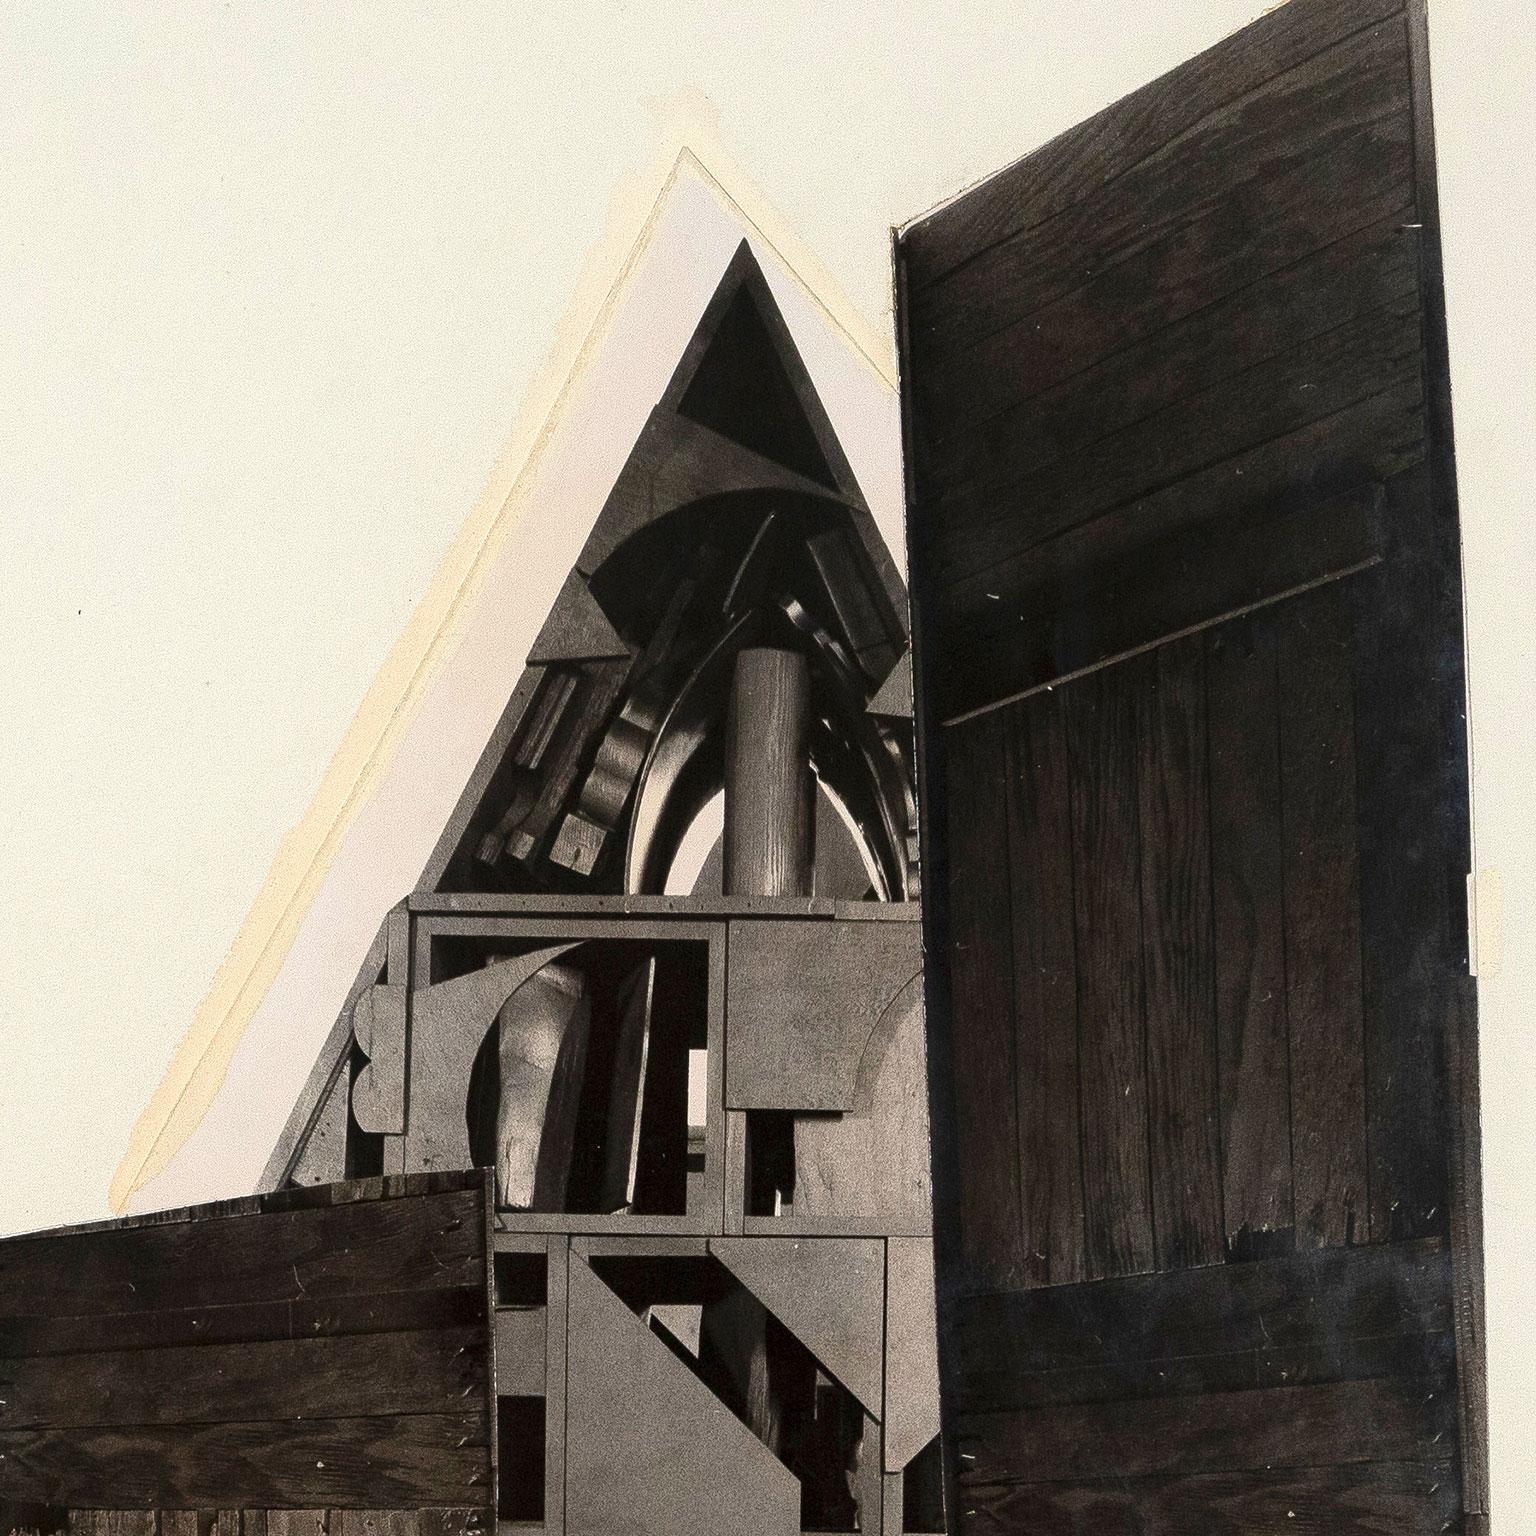 Collage was an important part of Louise Nevelson's practice. The process mirrored her approach to sculpture; taking disparate elements and assembling or uniting them into a complex whole. 

Similar to many of her American contemporaries, Nevelson